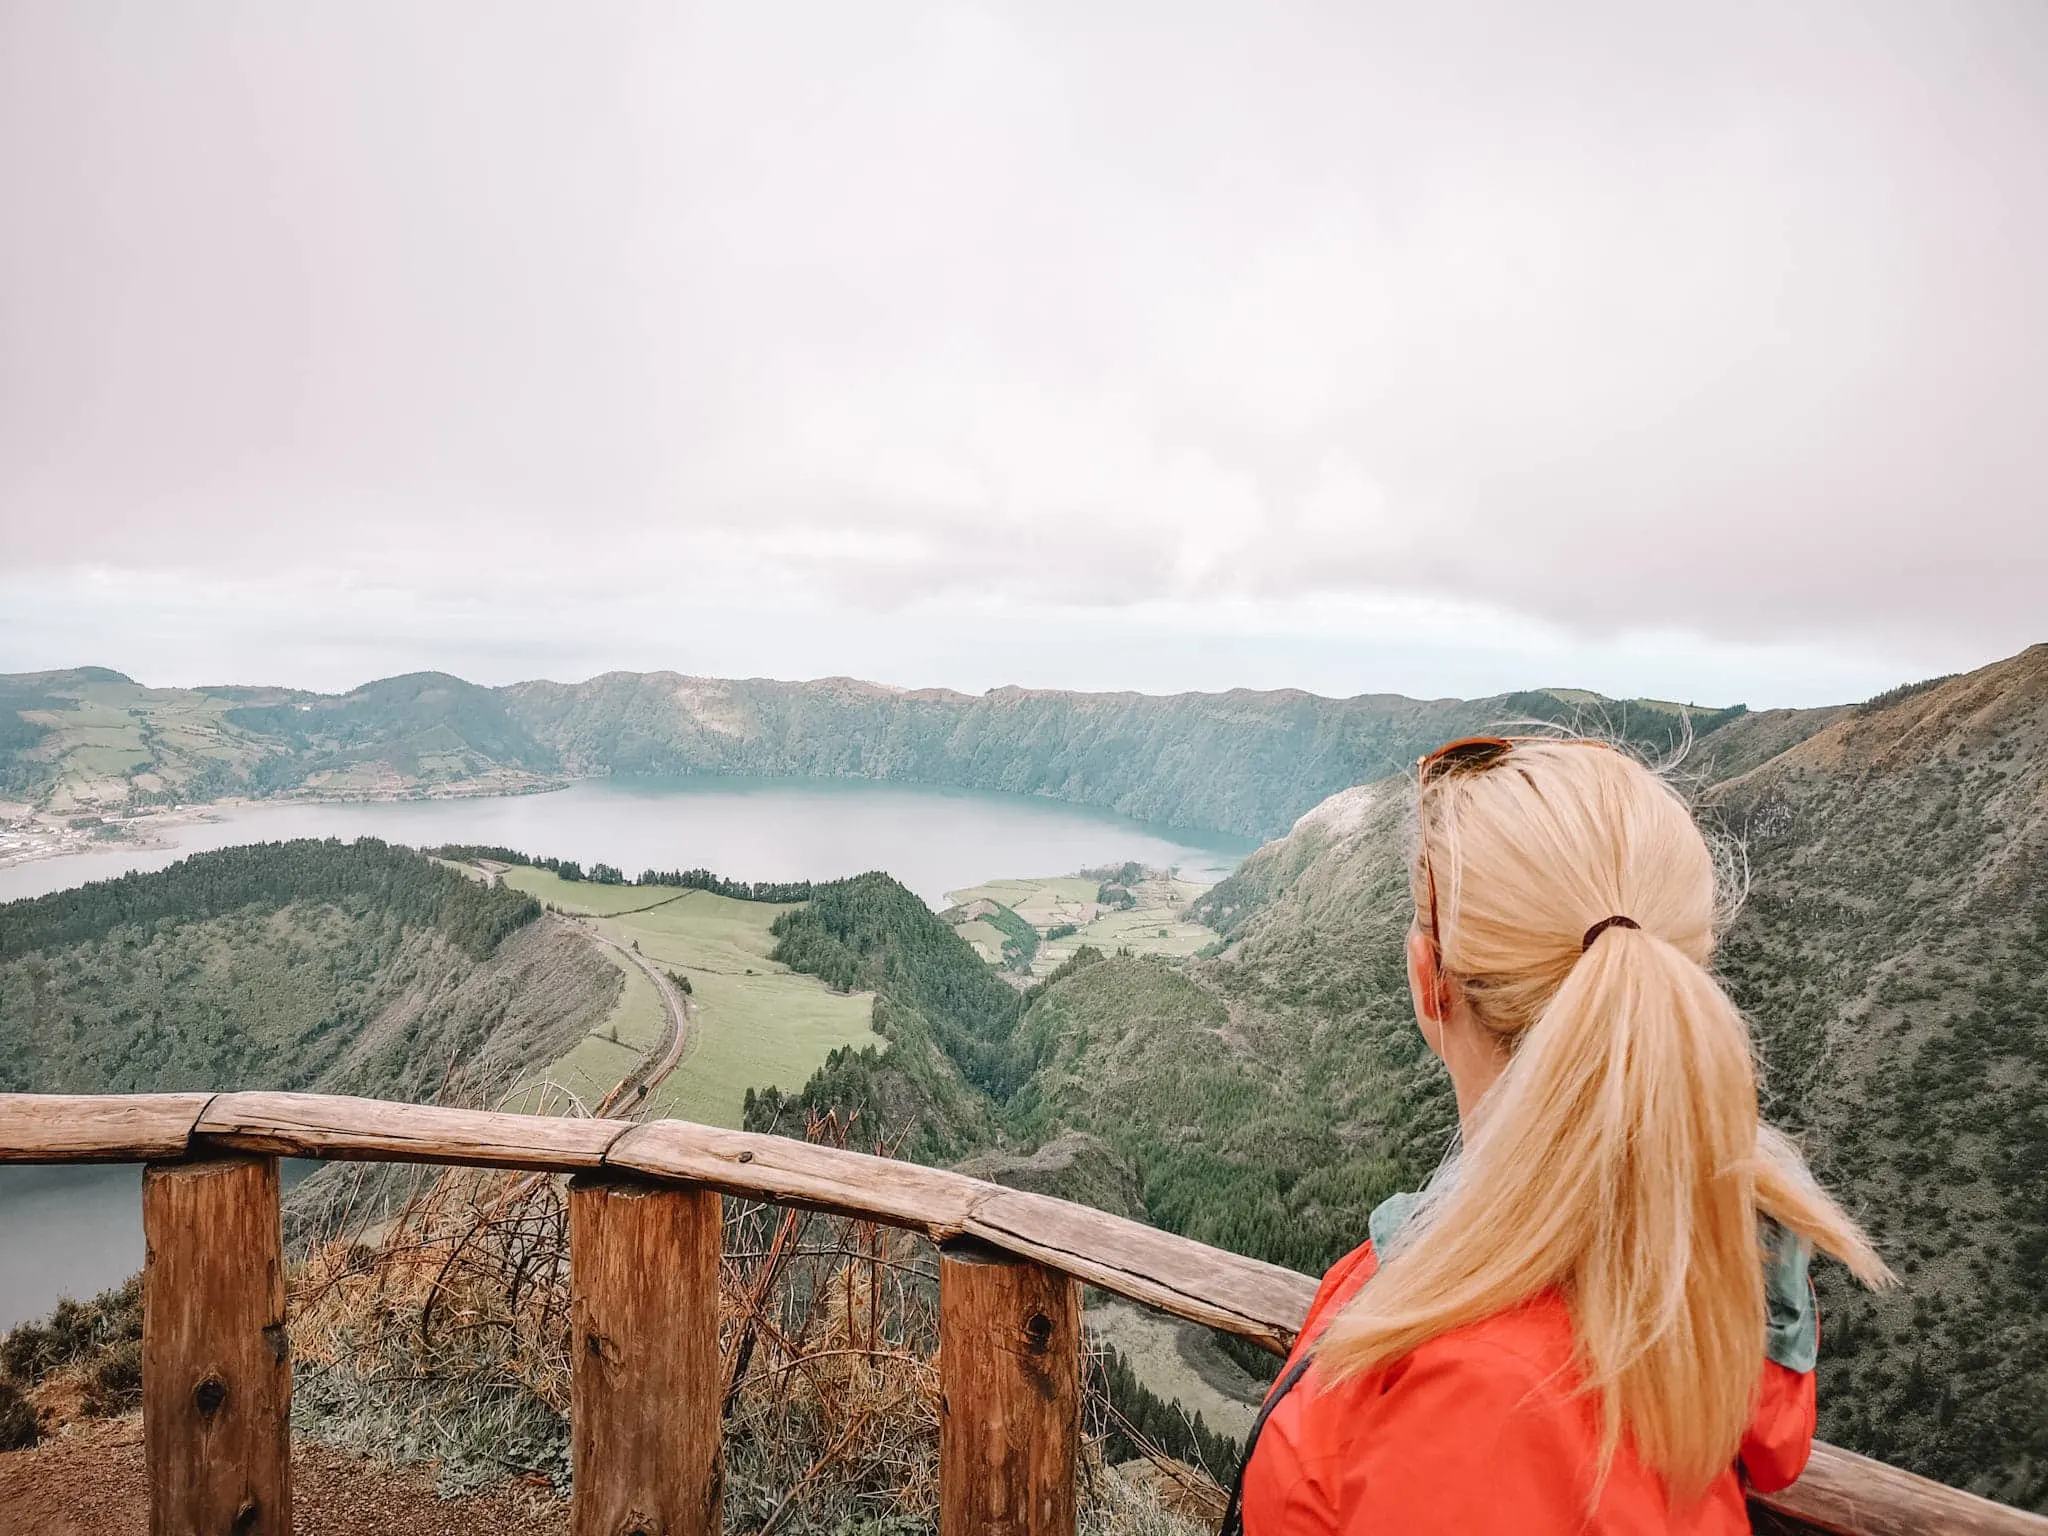 20 Unmissable Things To Do On São Miguel Island, Azores - Sao Miguel